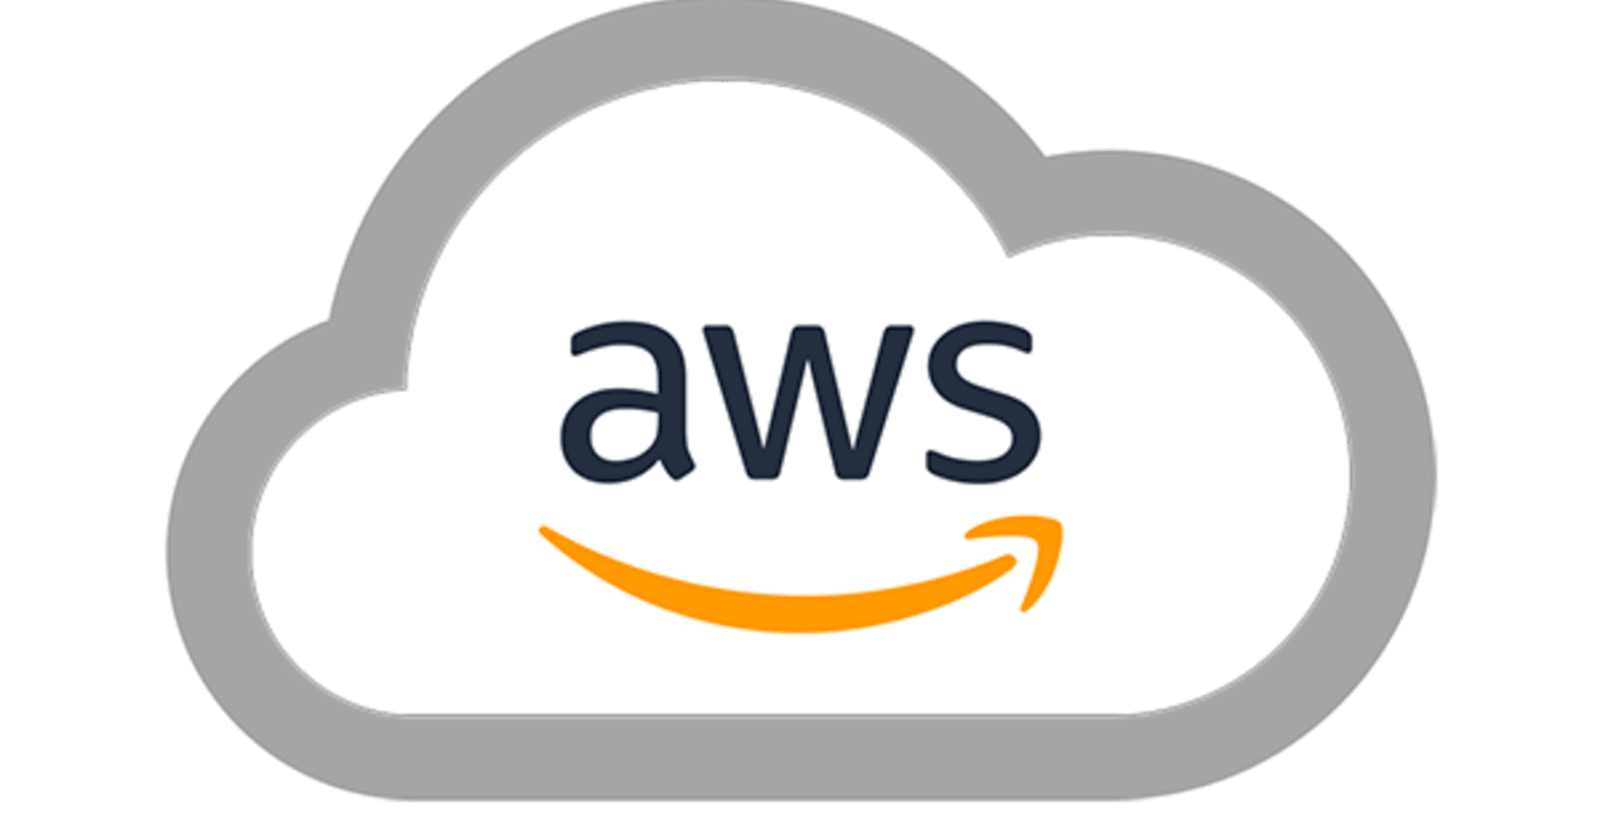 What exactly makes AWS so popular?